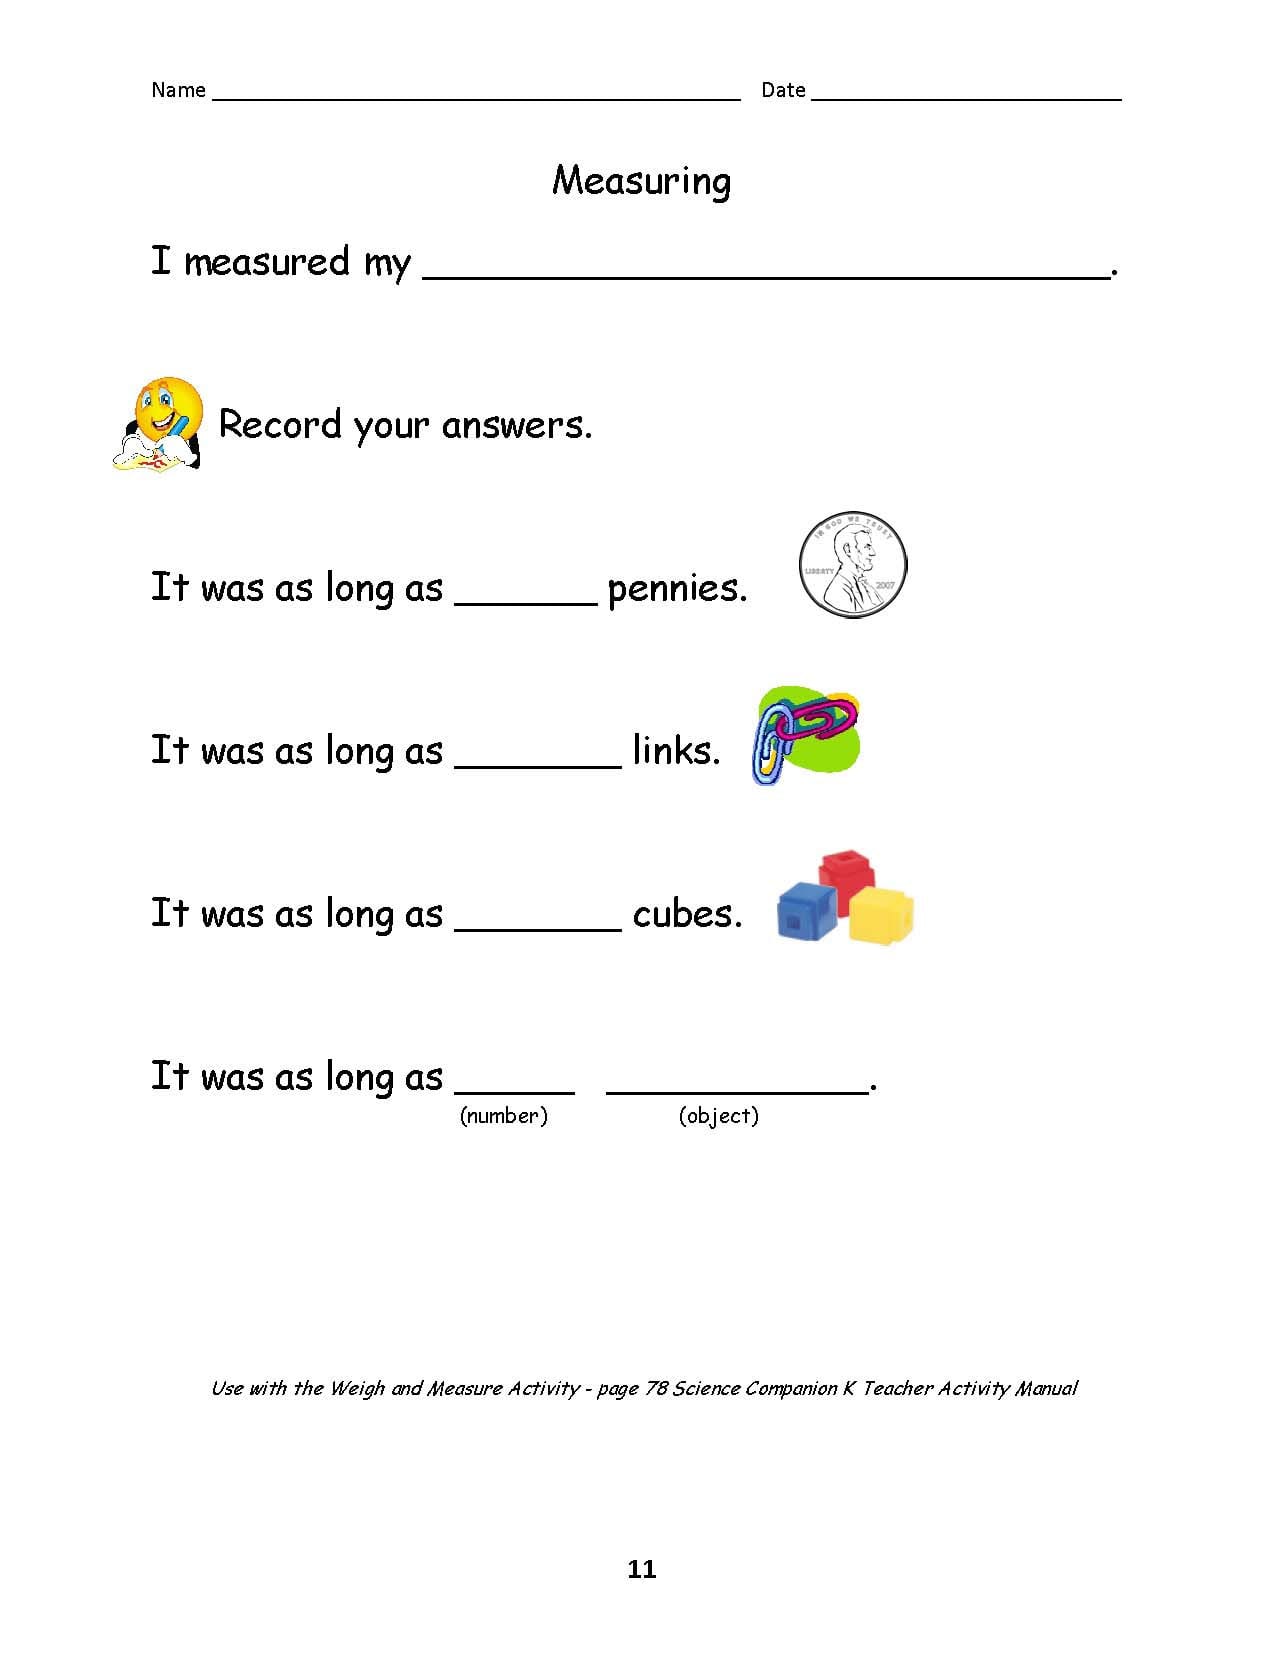 internet safety worksheets for elementary students db excelcom